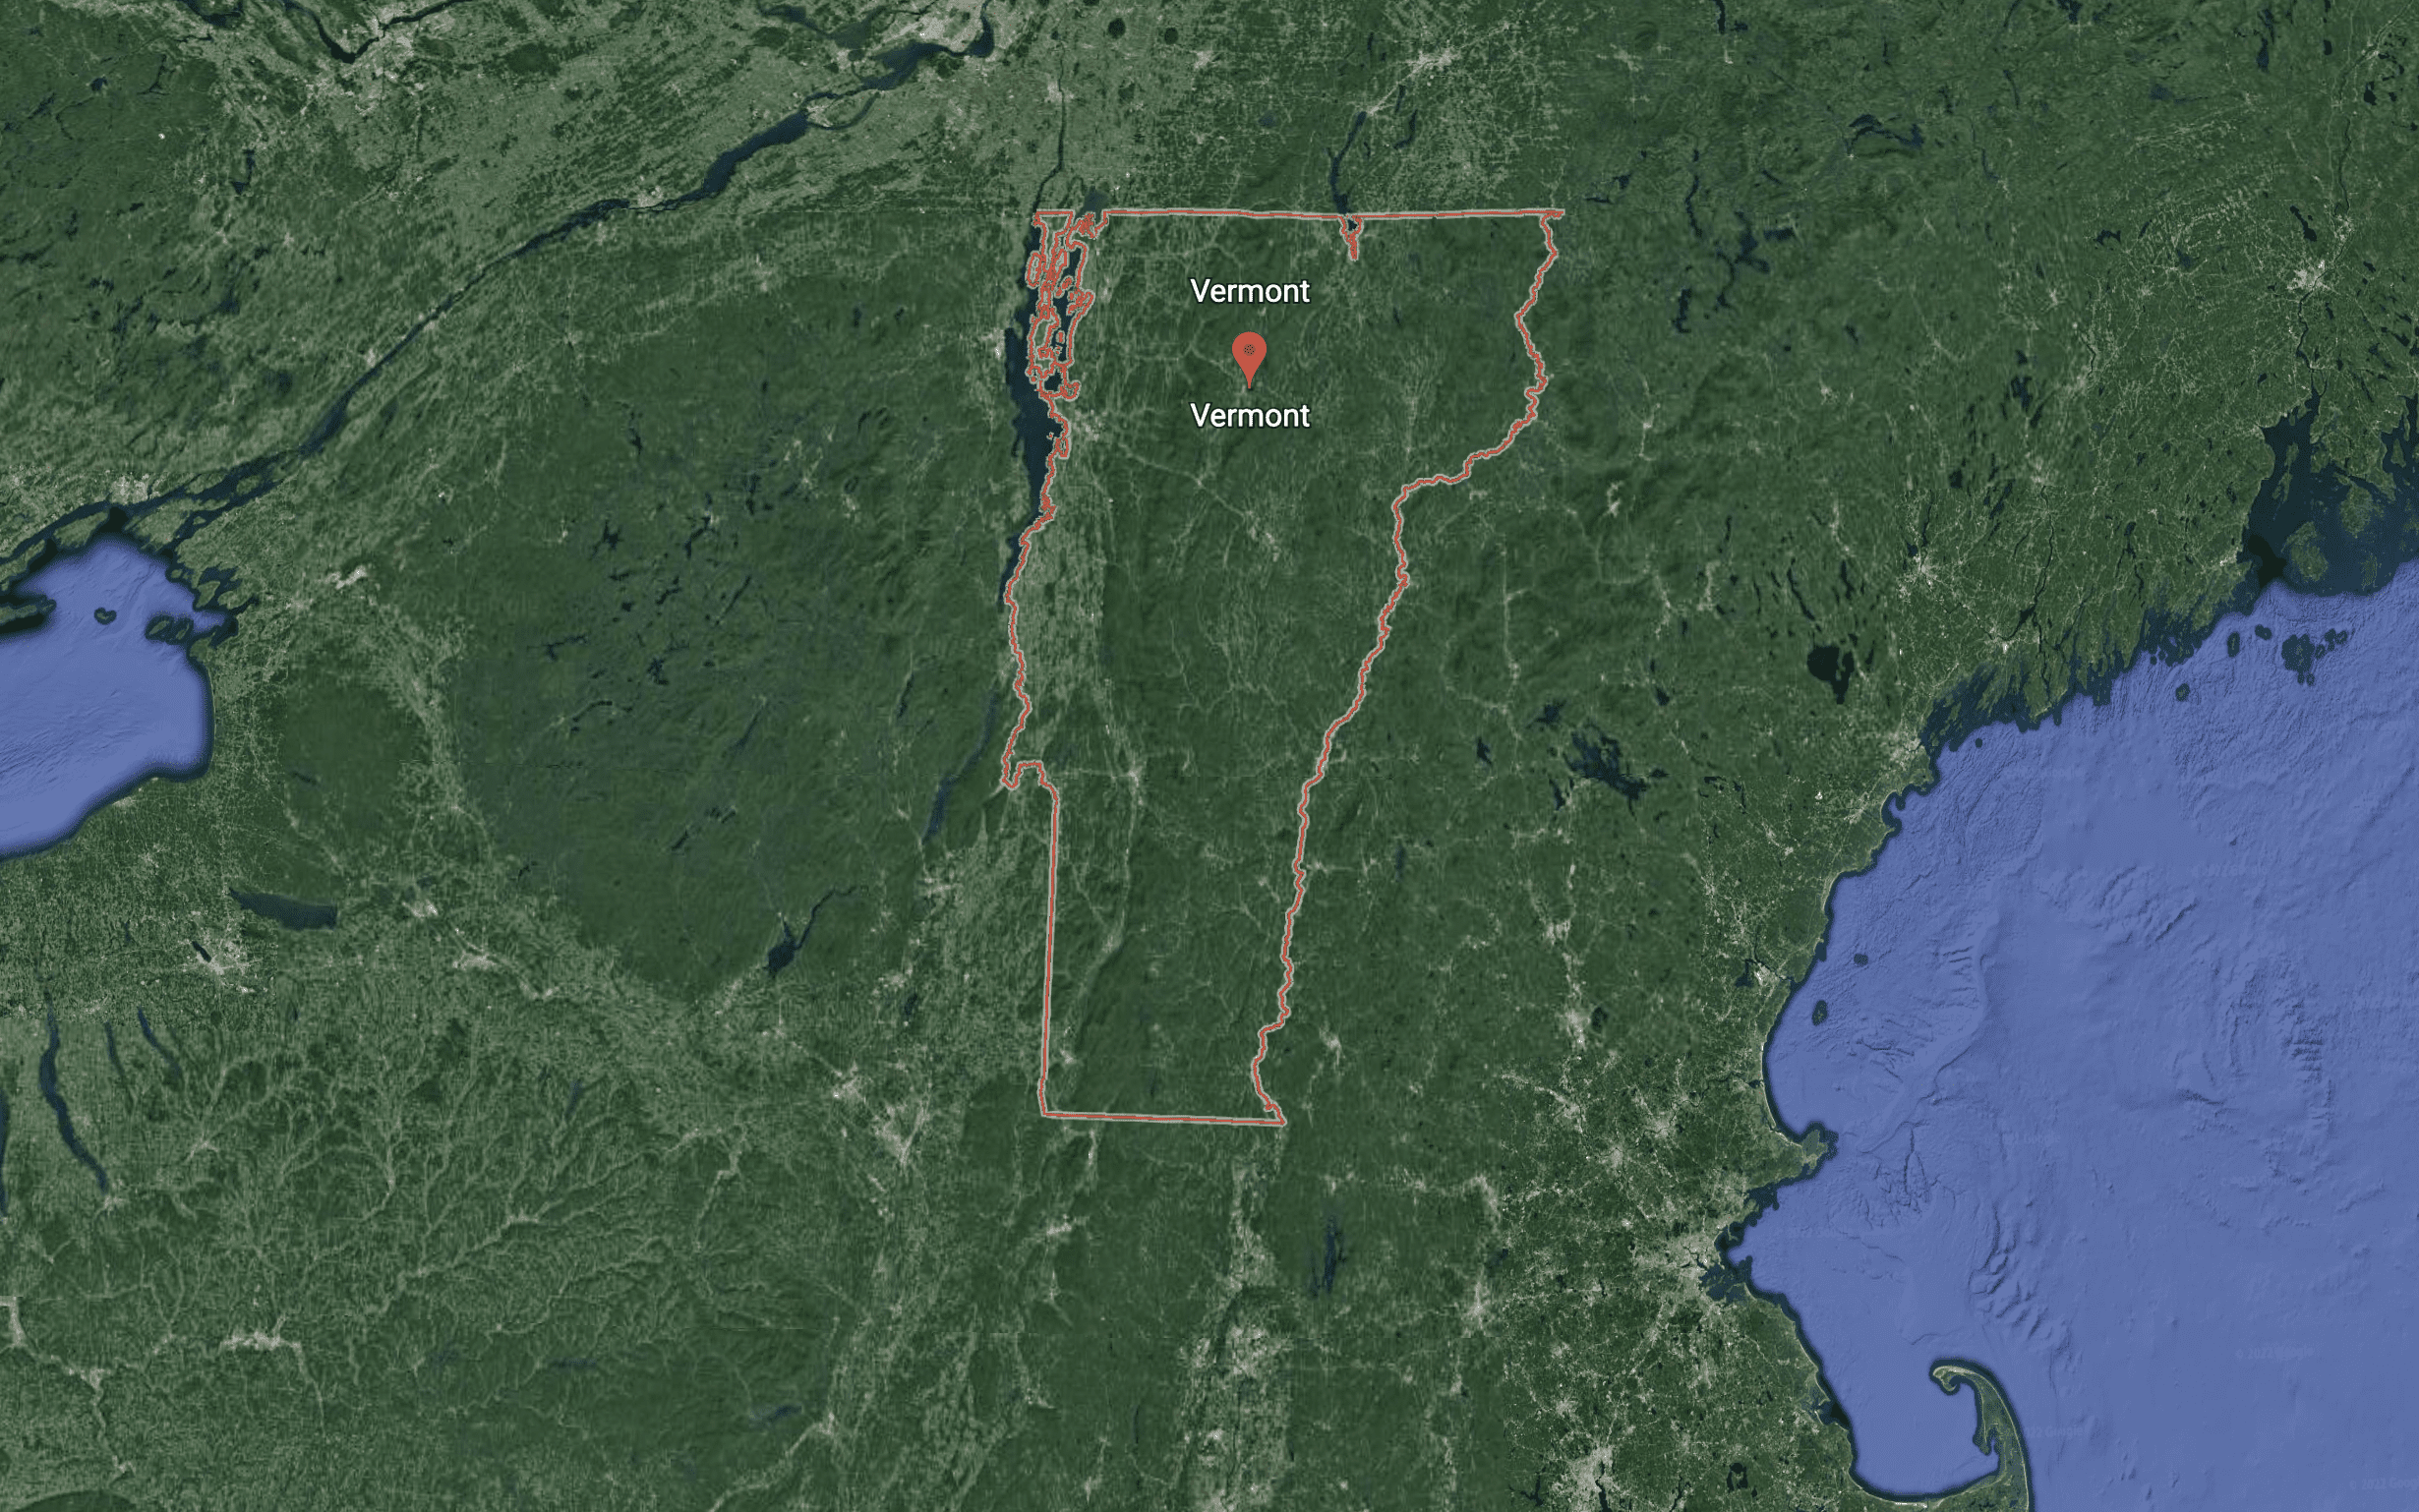 Satellite overhead image of Vermont from Google Earth 2022